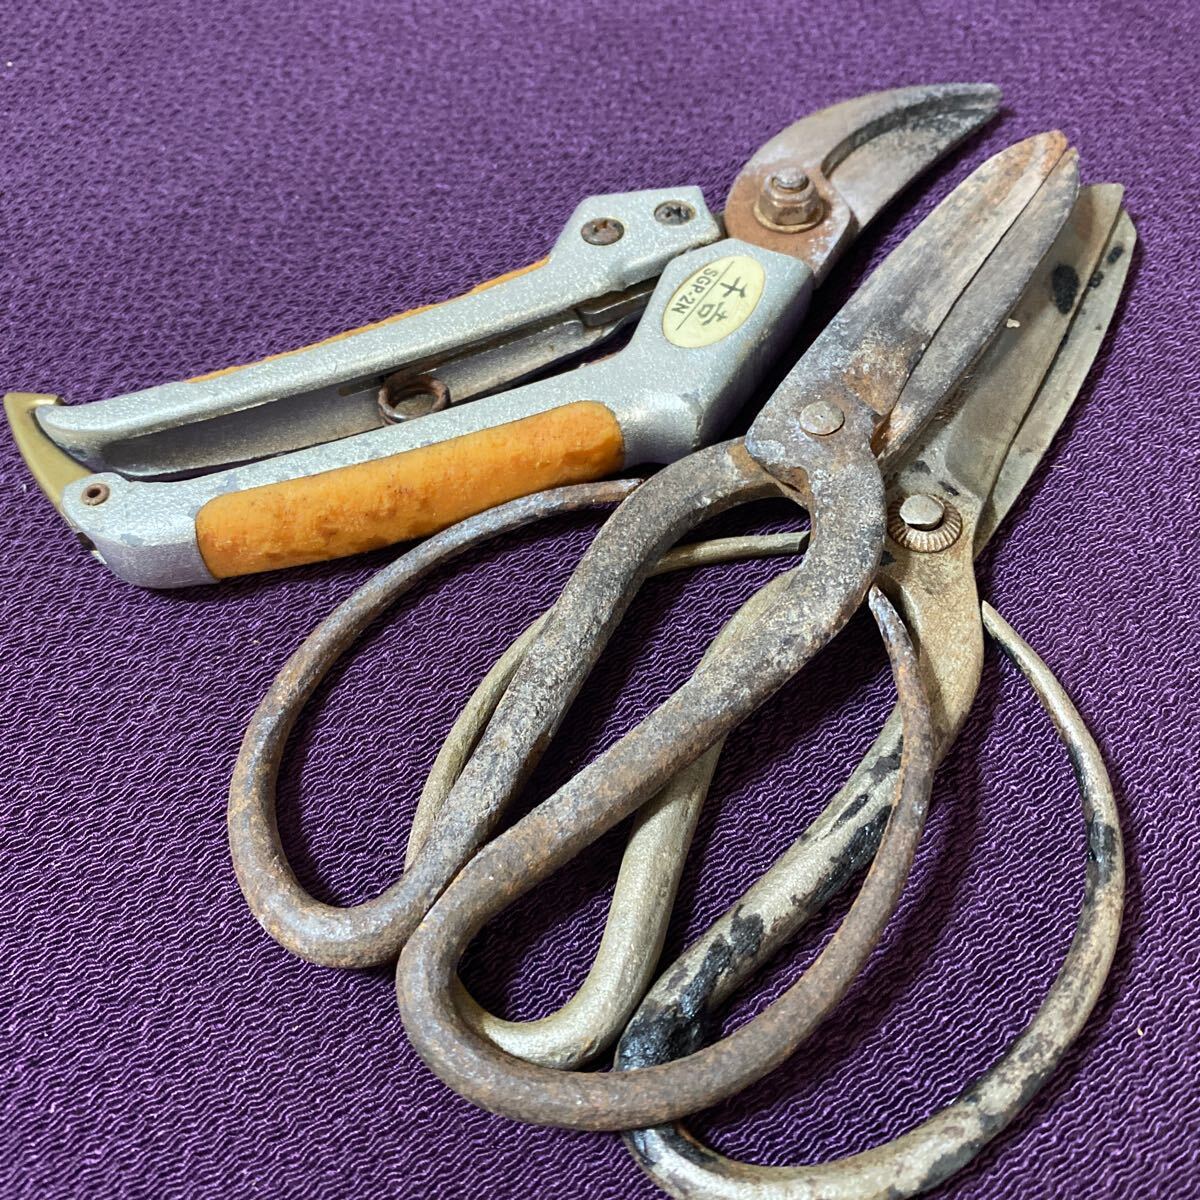  pruning .3ps.@ thousand .SGP-2N / Sakai regular preeminence / other plant tongs pruning scissors old . rust gla attaching equipped junk scissors 